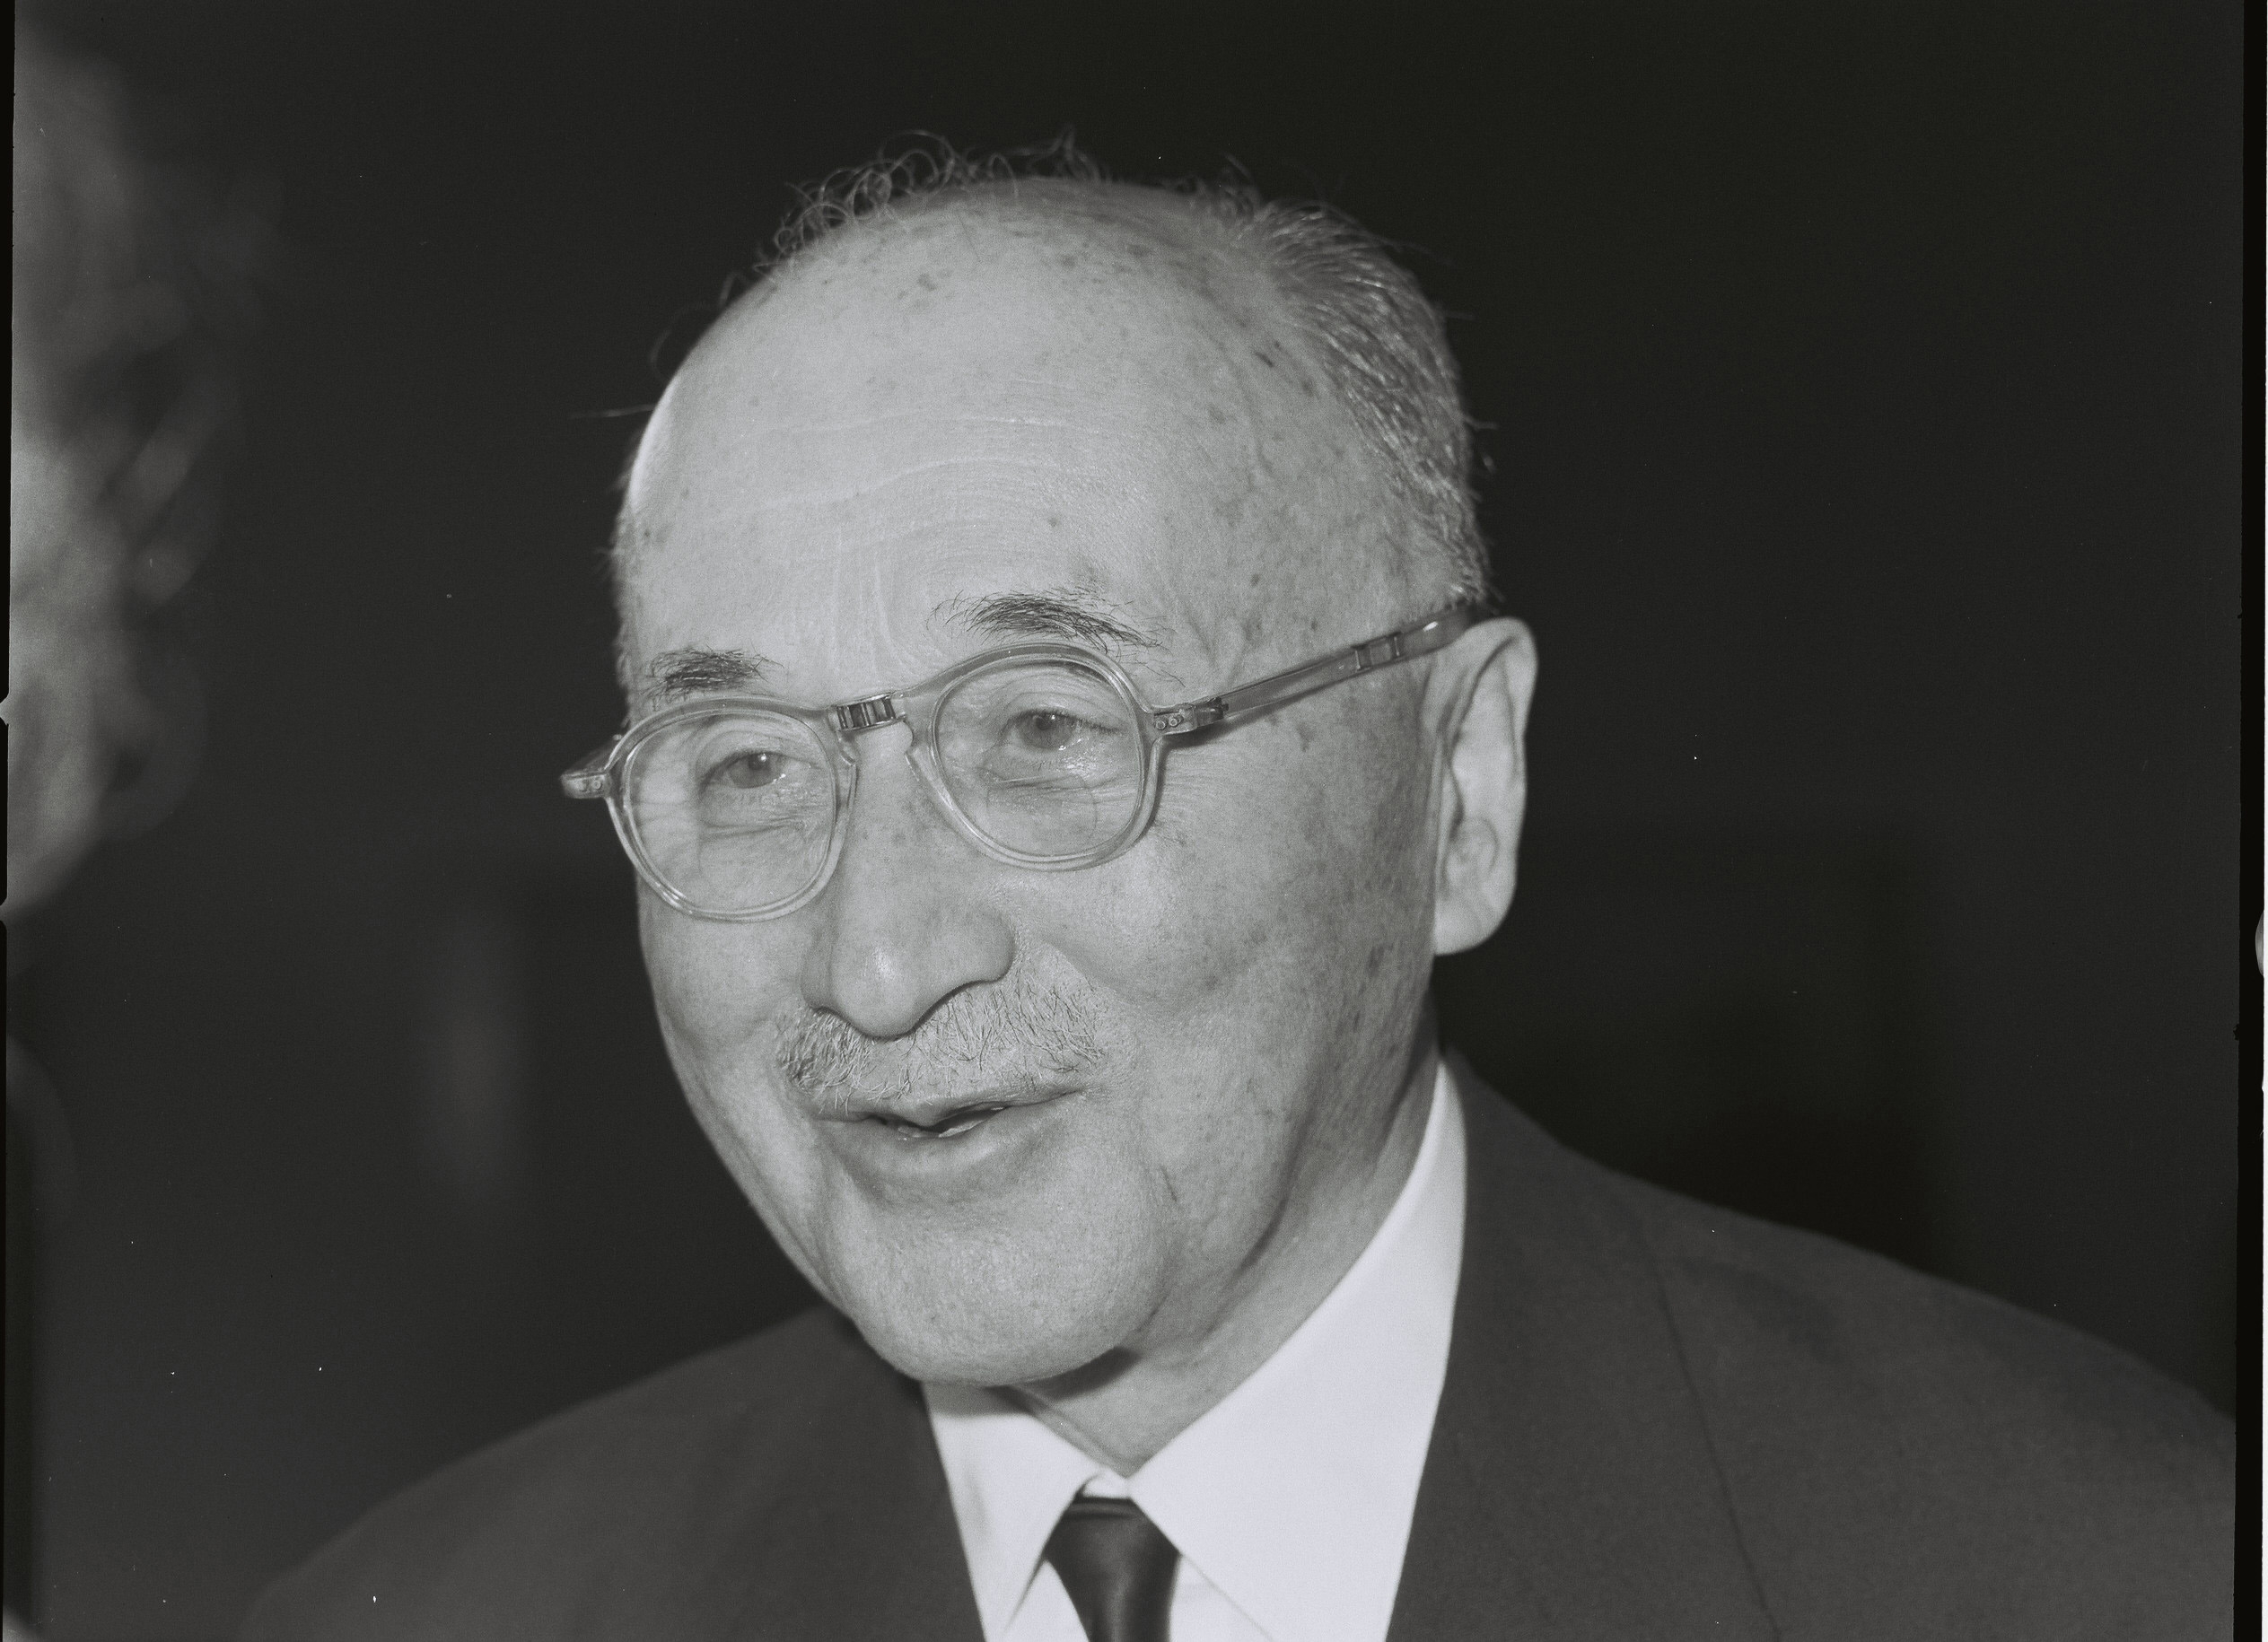  Jean Monnet The Union Of Europe Cannot Be Based On Good Will Alone 